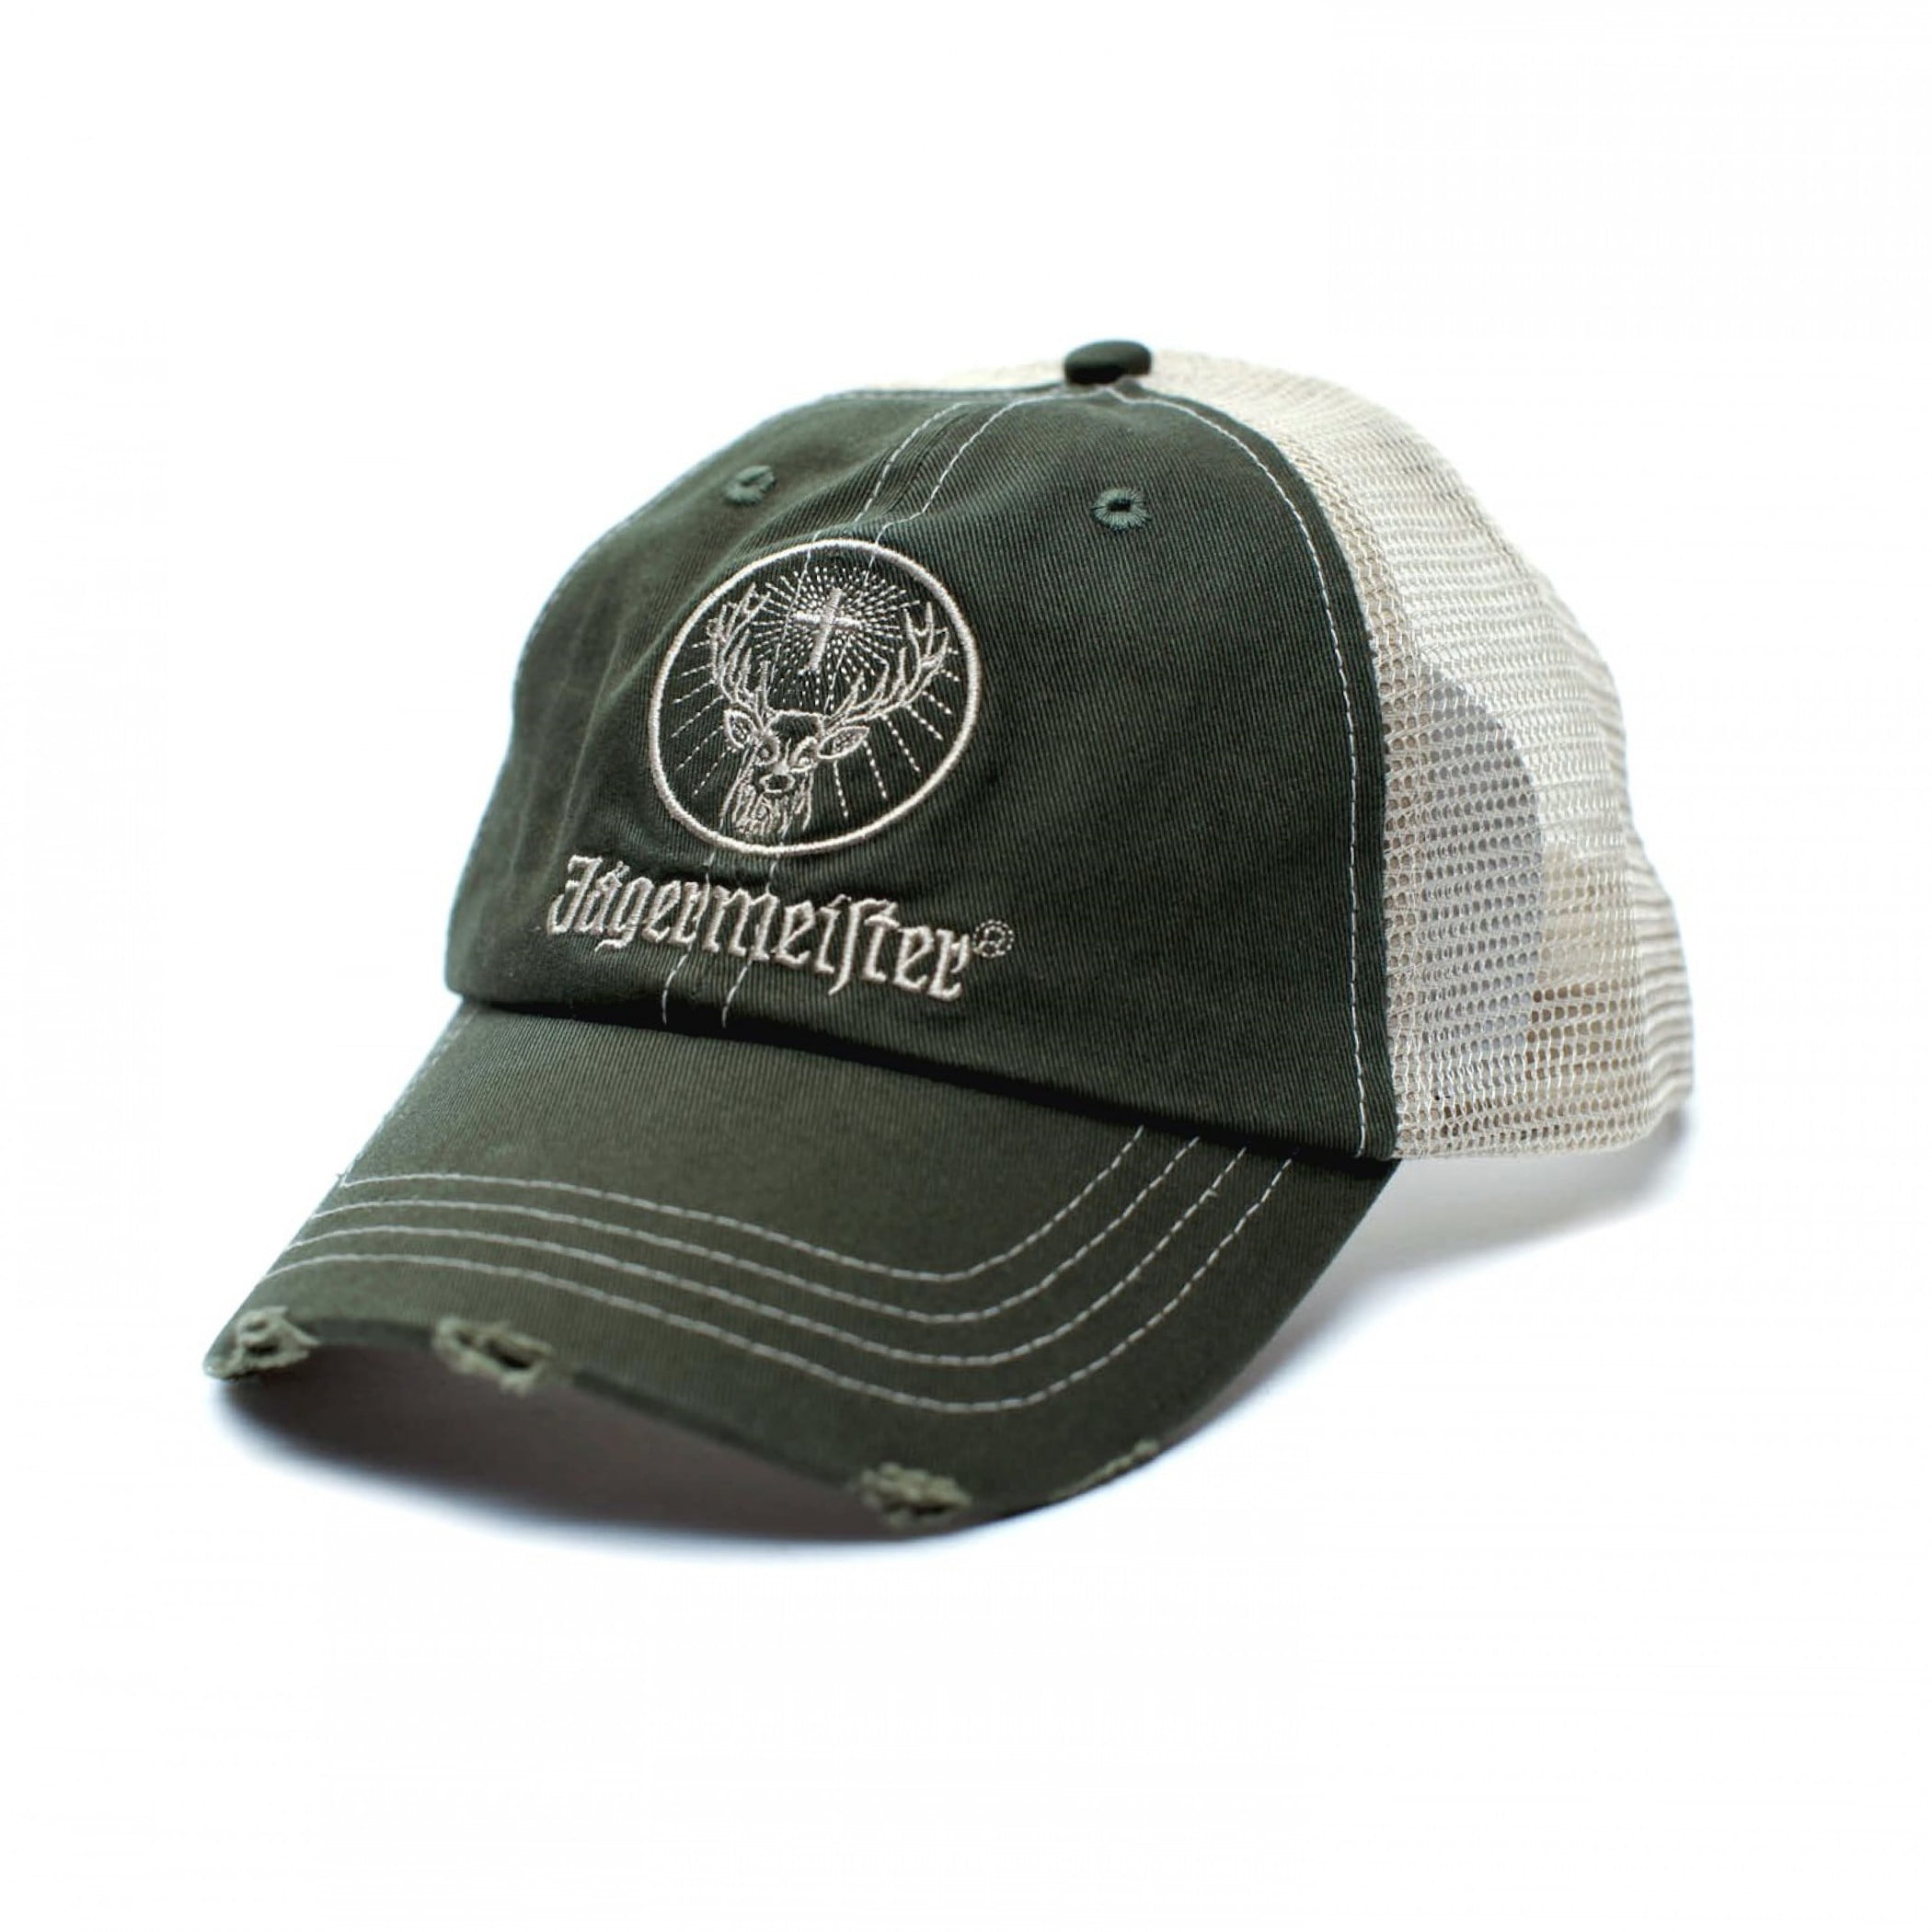 Details about   Jagermeifter Baseball Hat Cap Mesh with Adjustable Snaps Shipped Free 